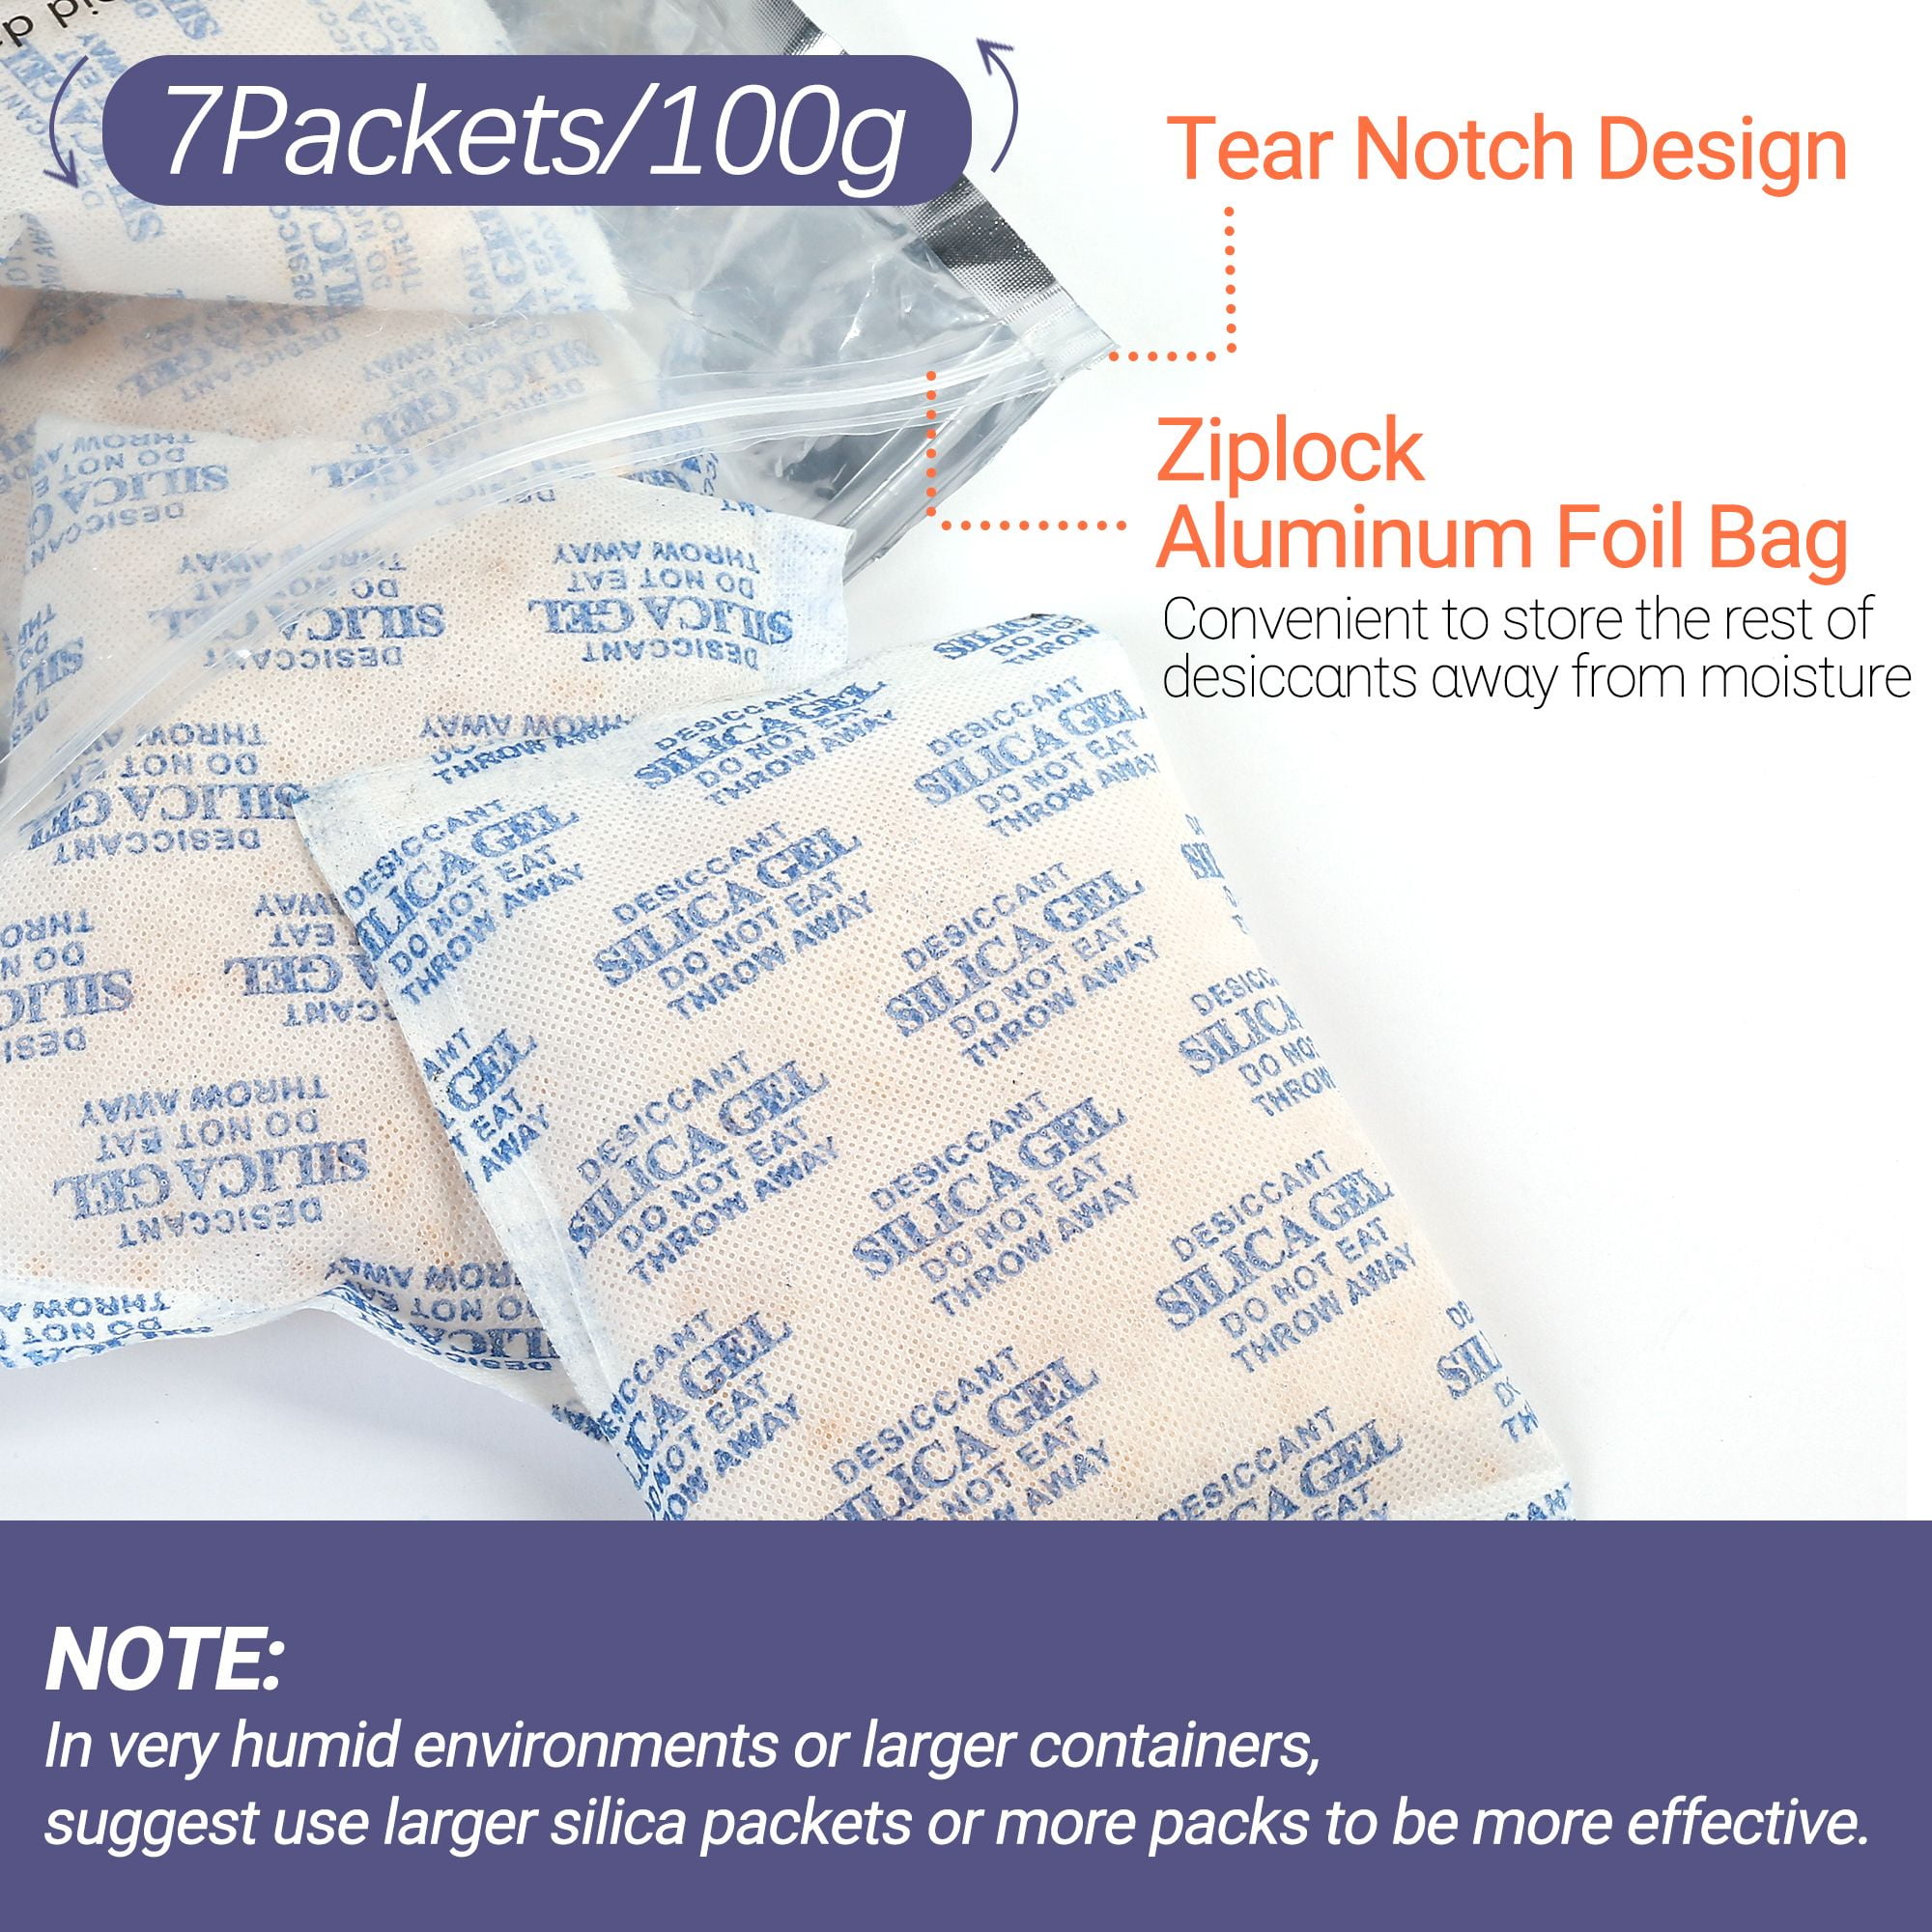 LotFancy Silica Gel Packs, 2 Gram 160 Packets Desiccant Packs, Orange to  Green Indicating, Non-Toxic Moisture Absorber Desiccant Bags